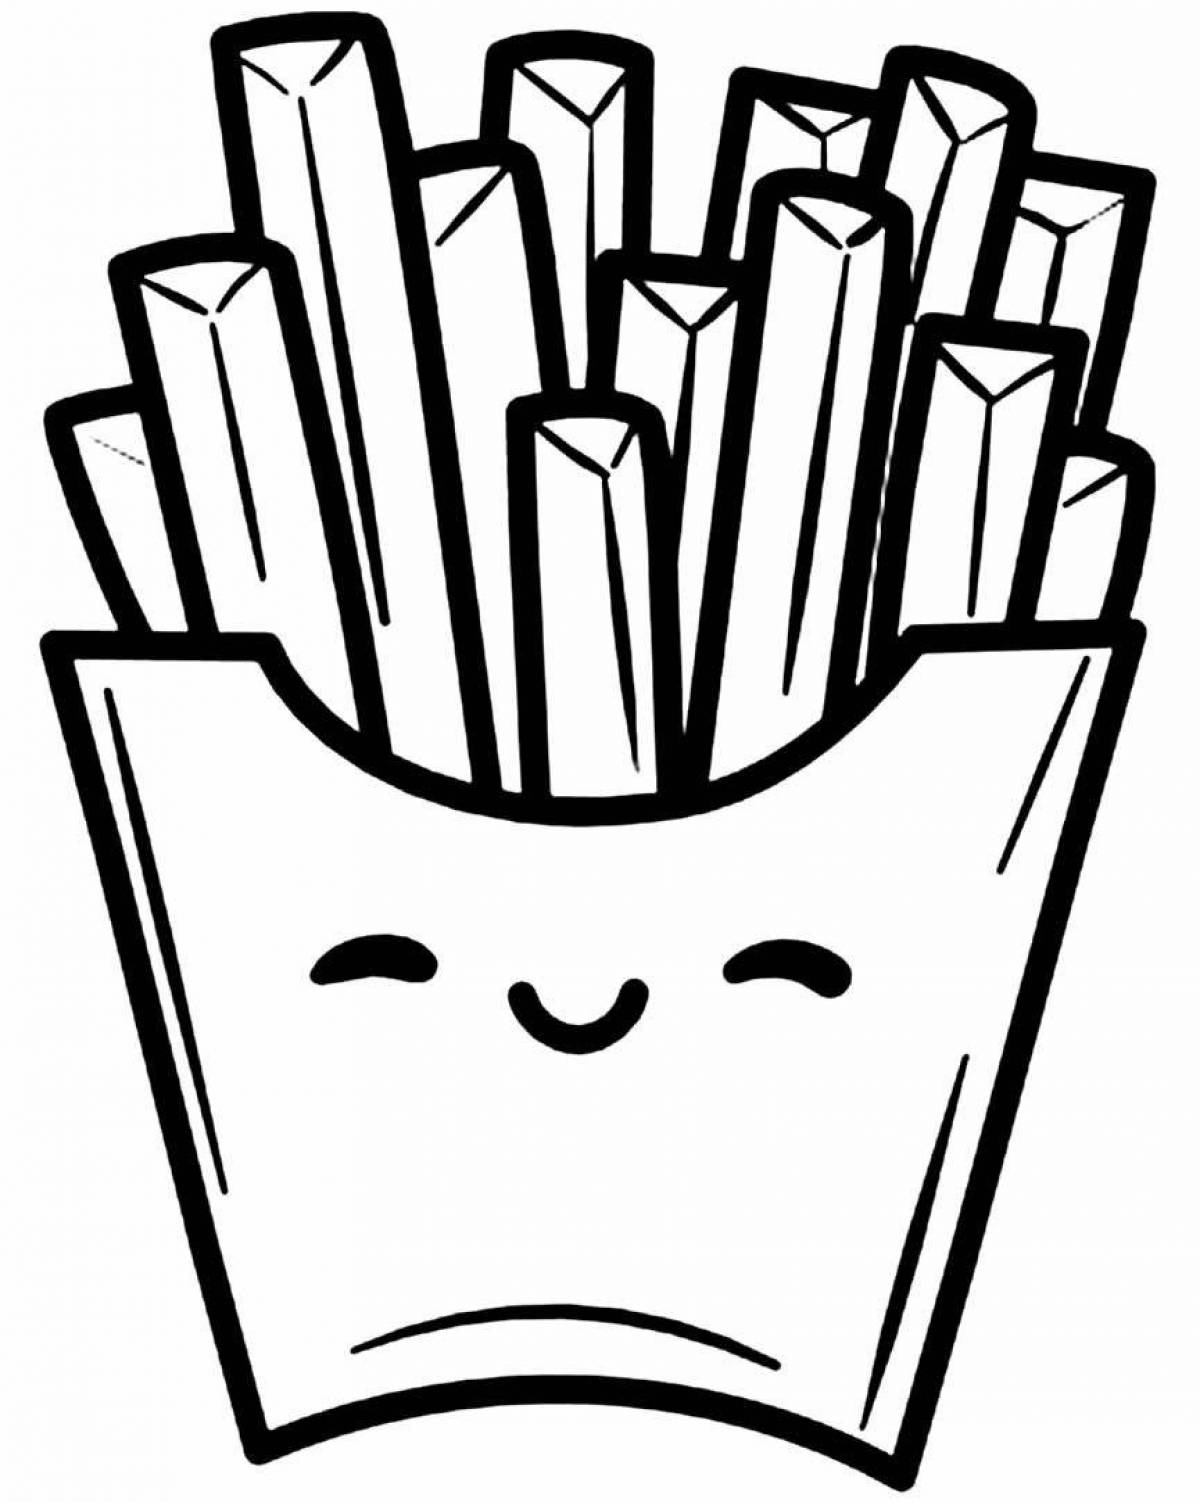 Fatty french fries coloring